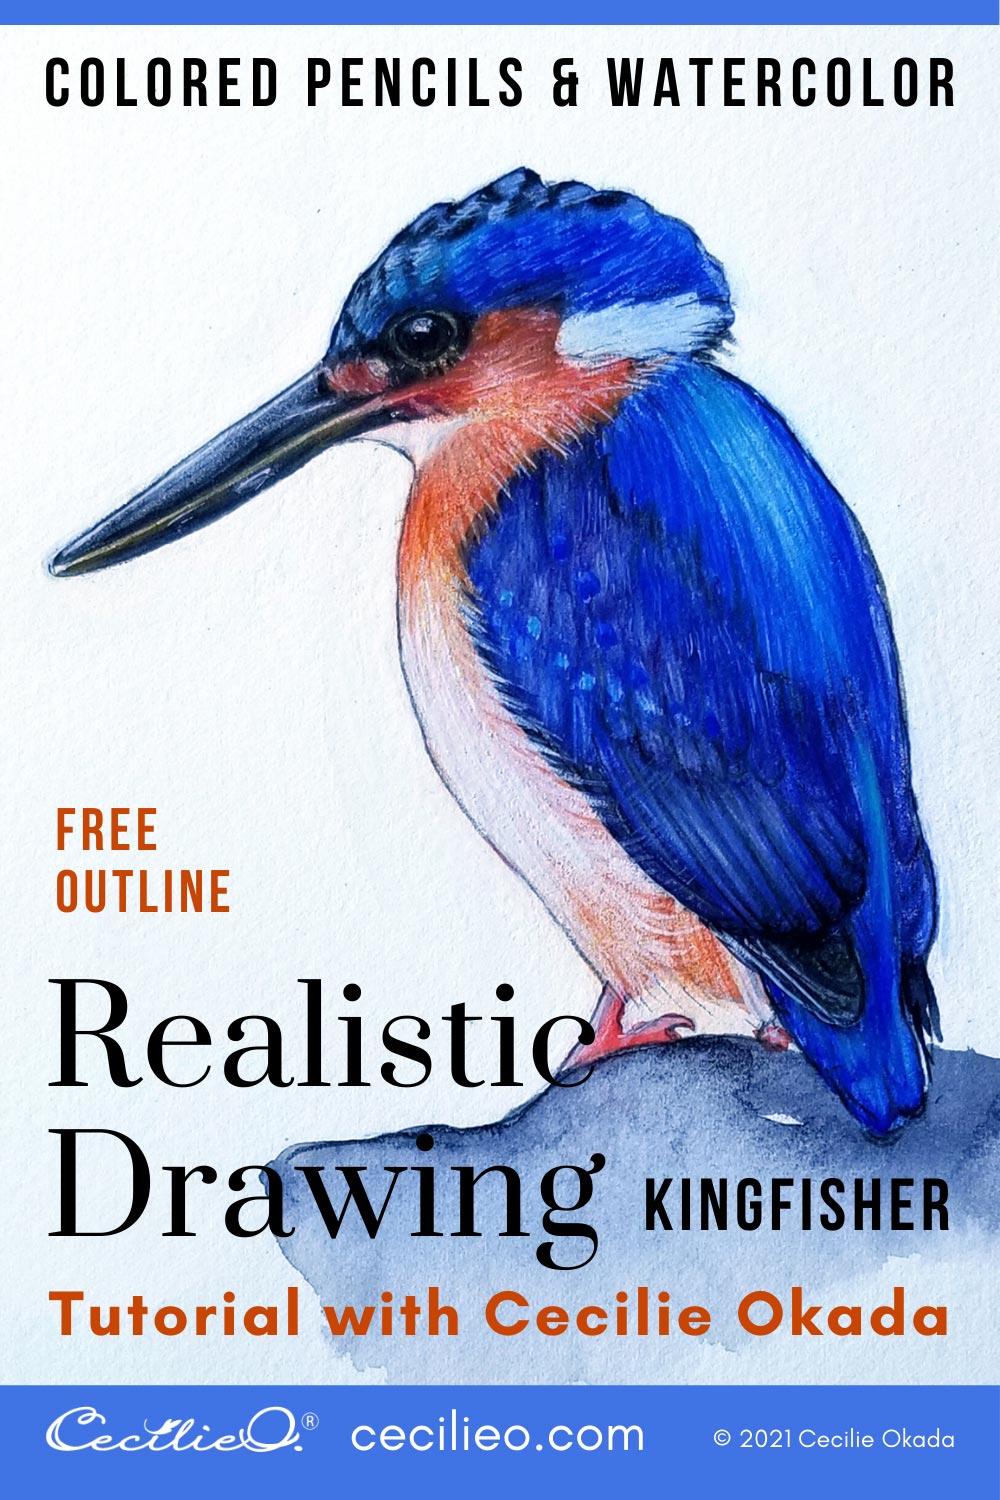 https://cecilieo.com/wp-content/uploads/2021/07/1c-realistic-drawing-kingfisher-cecilieo.jpg